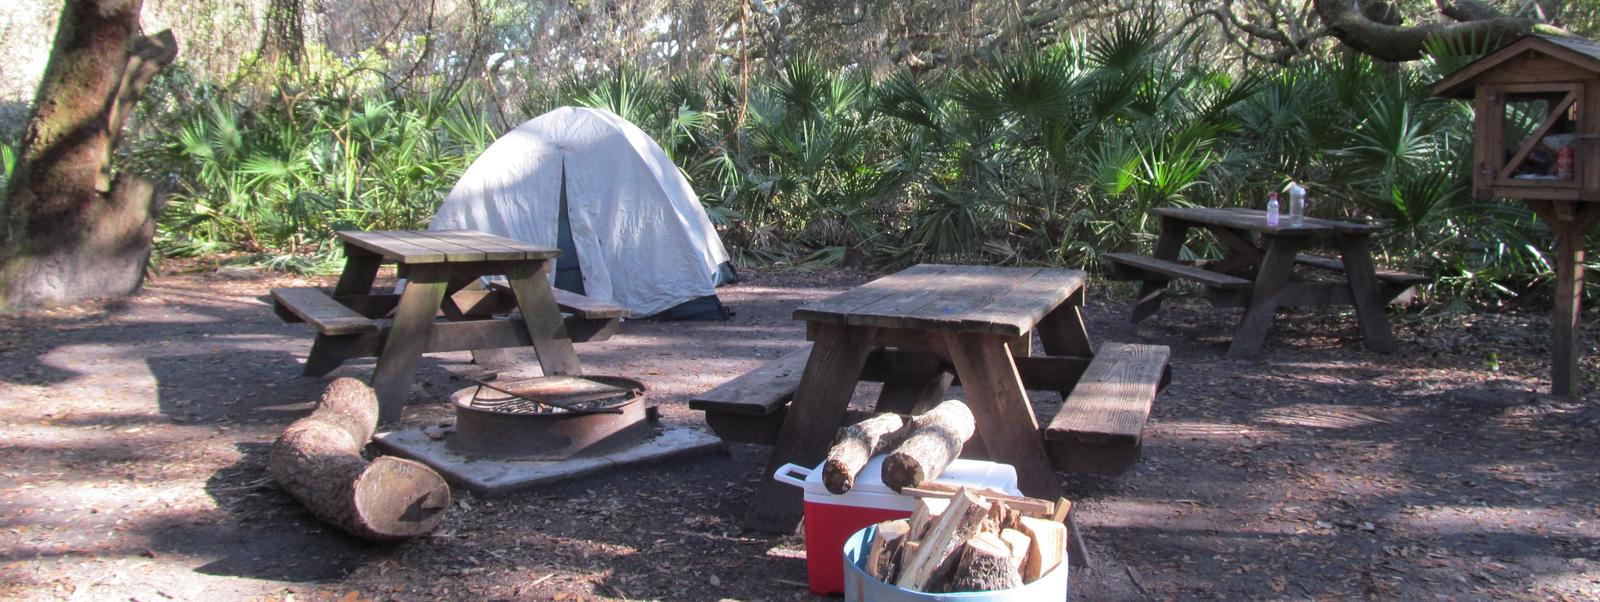 campsite with picnic table, food cage, and fire ring under live oak treesSea Cap site 15